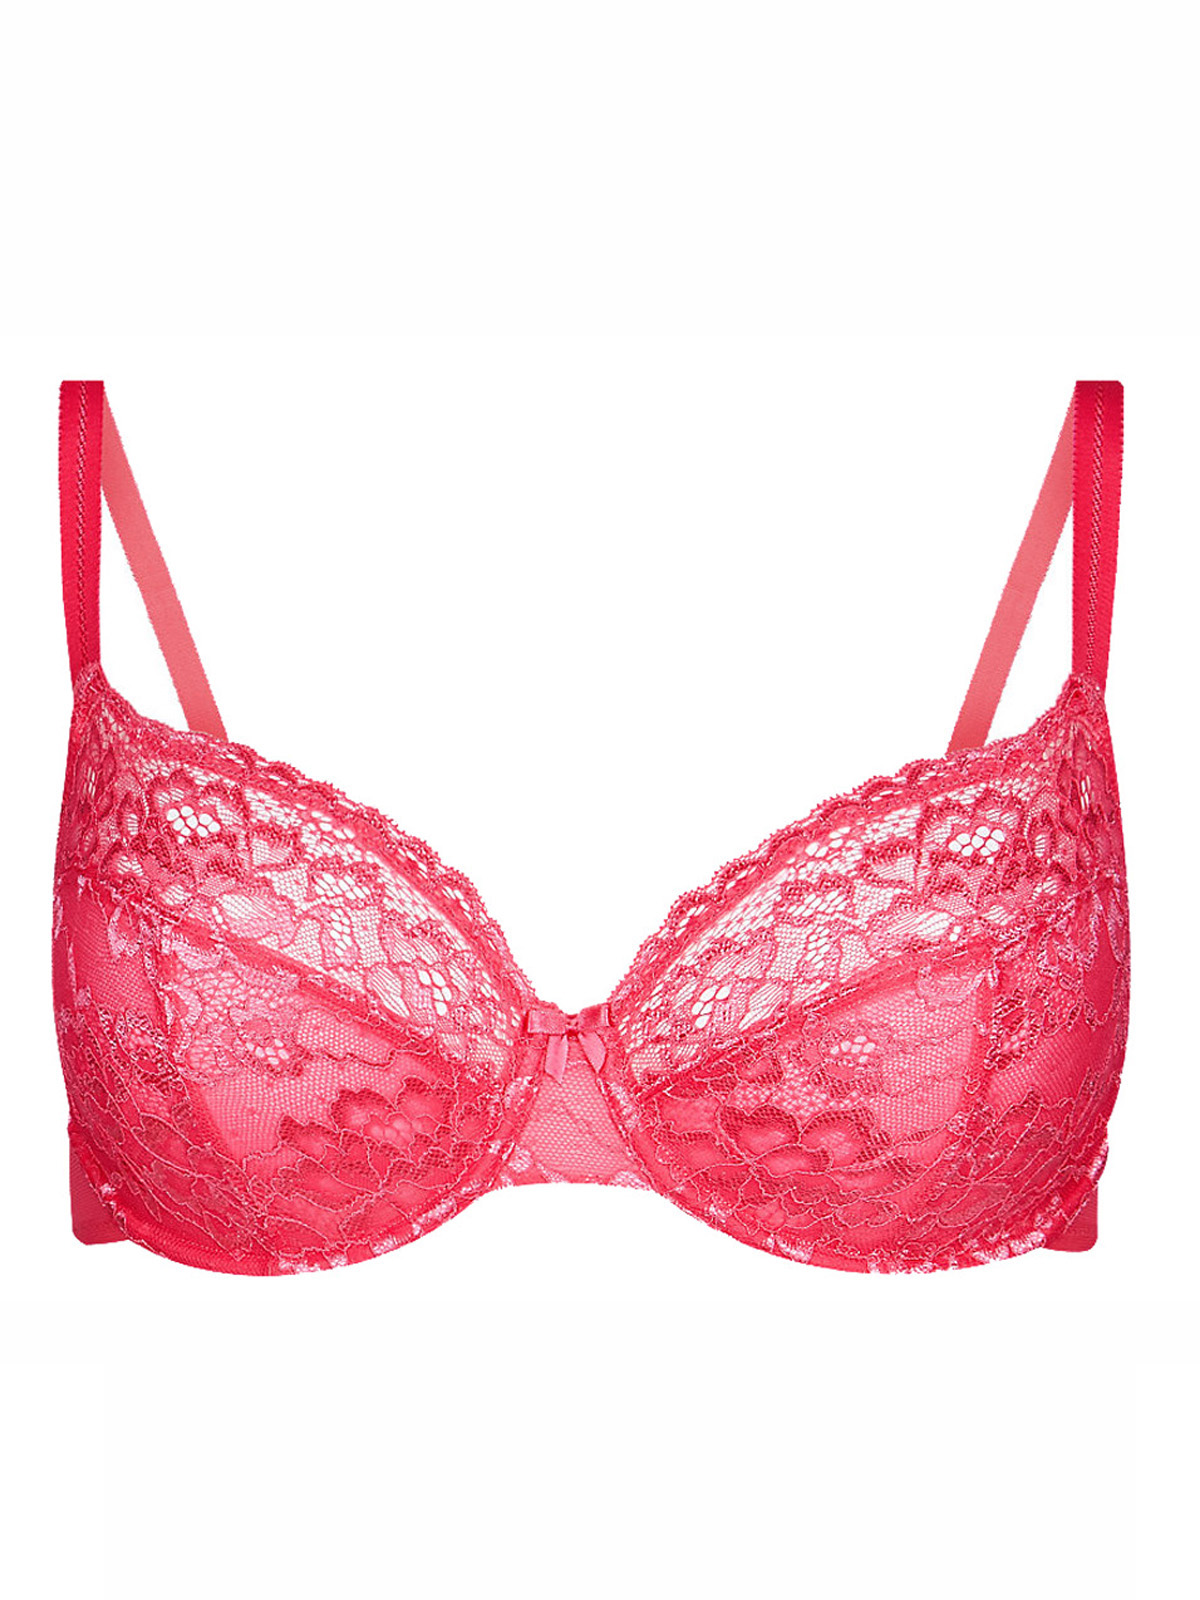 Marks and Spencer - - M&5 BRIGHT-PINK Non-Padded Lace Full Cup Bra ...